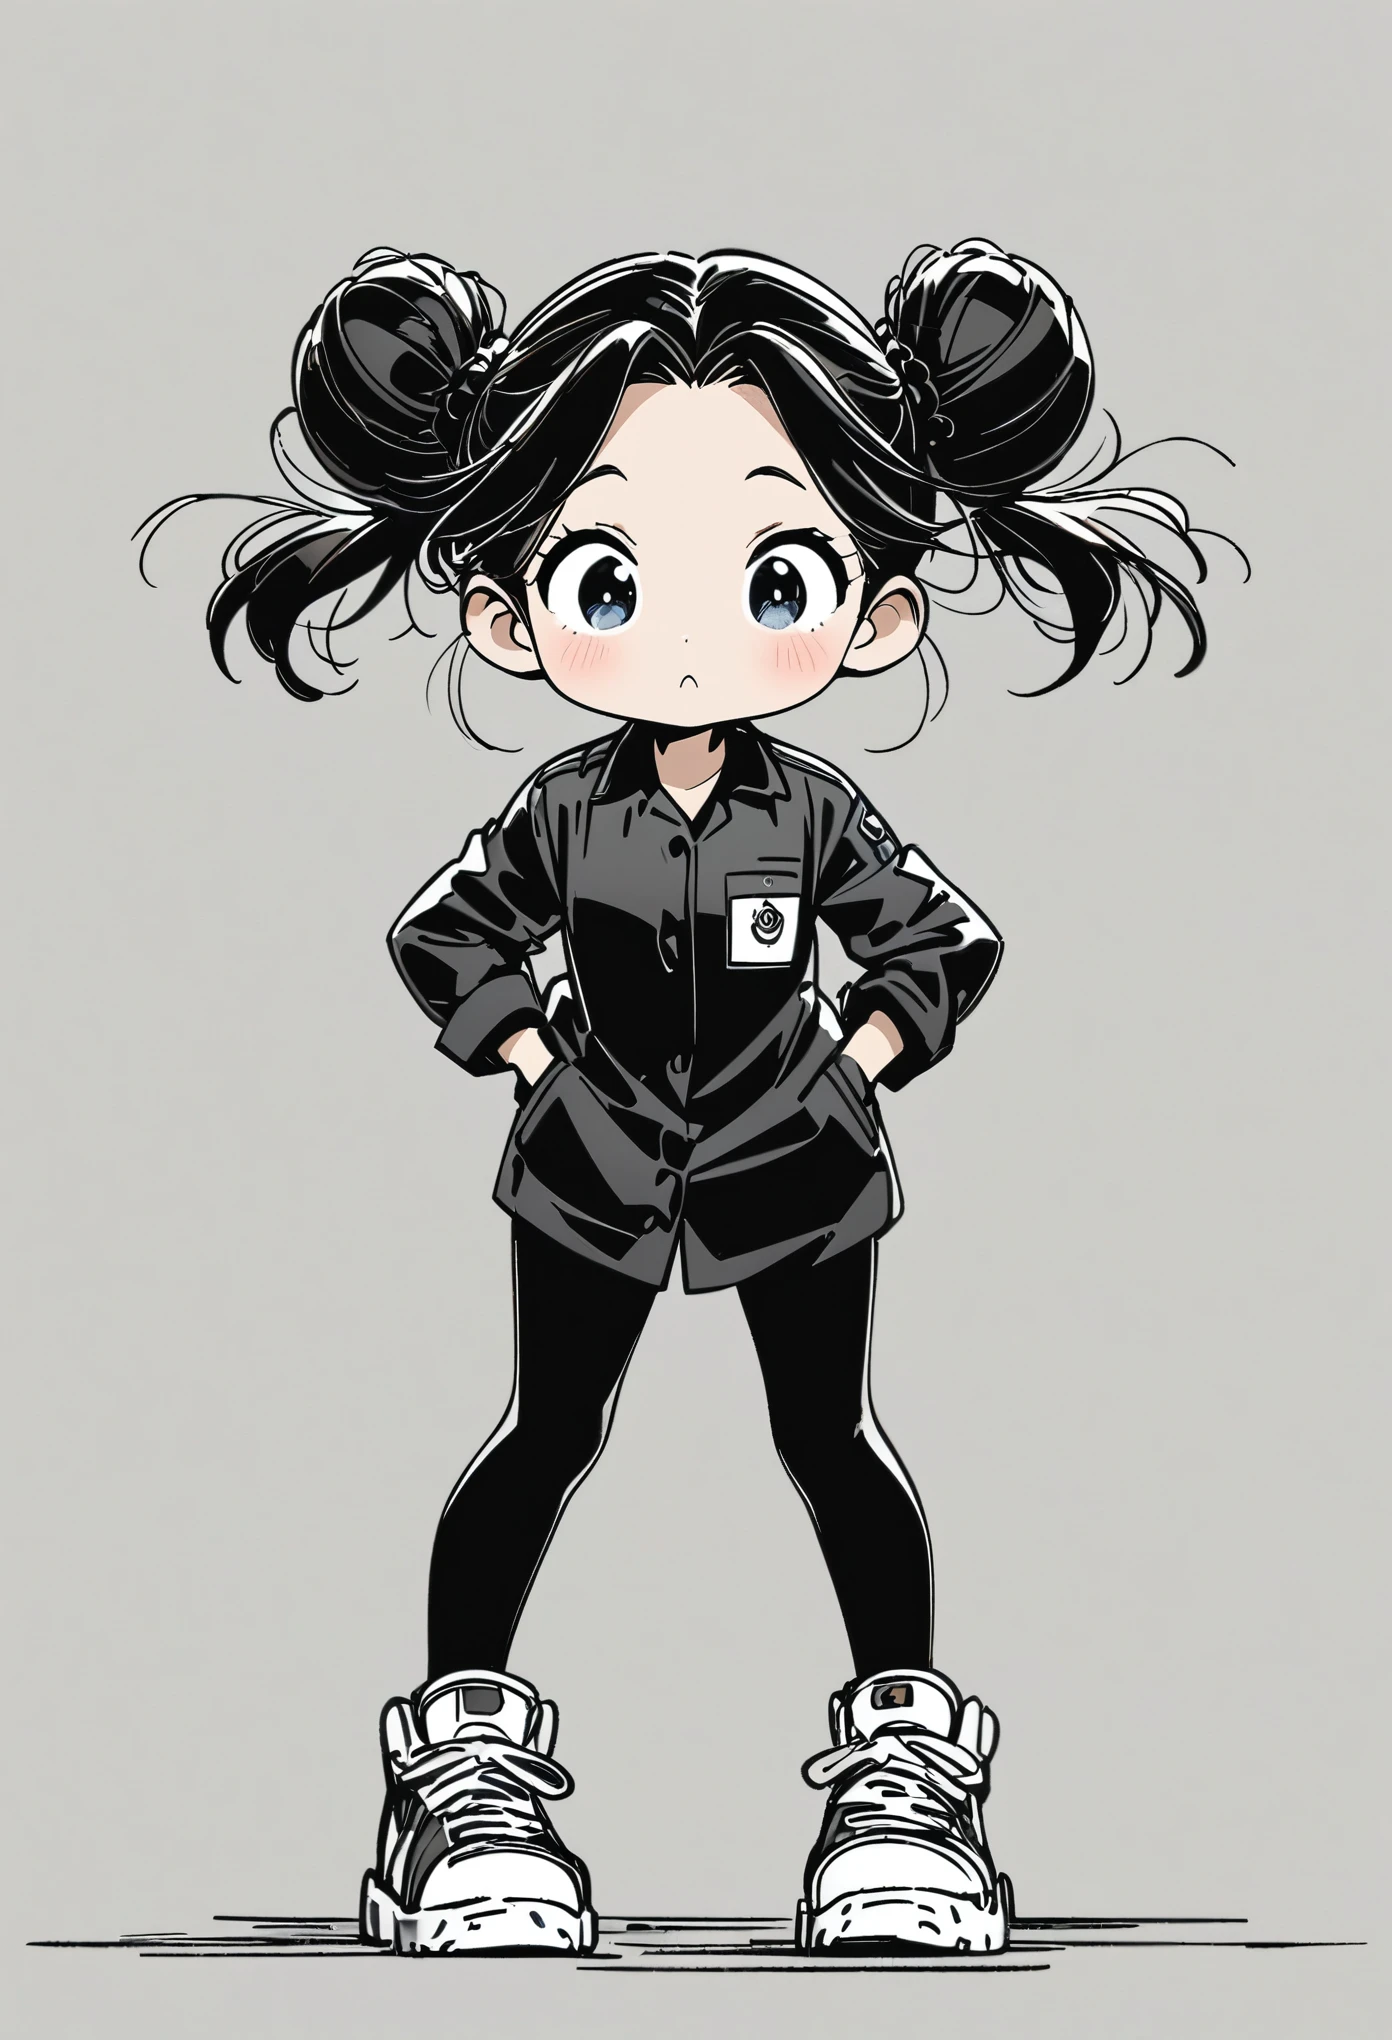 (best quality:1.2), anime sketch, black and white, black line art, cartoon character design, 1 girl, alone, big eyes, cute expression, double buns, shirt, work uniform, sneakers, standing, playful, interesting, simple lines